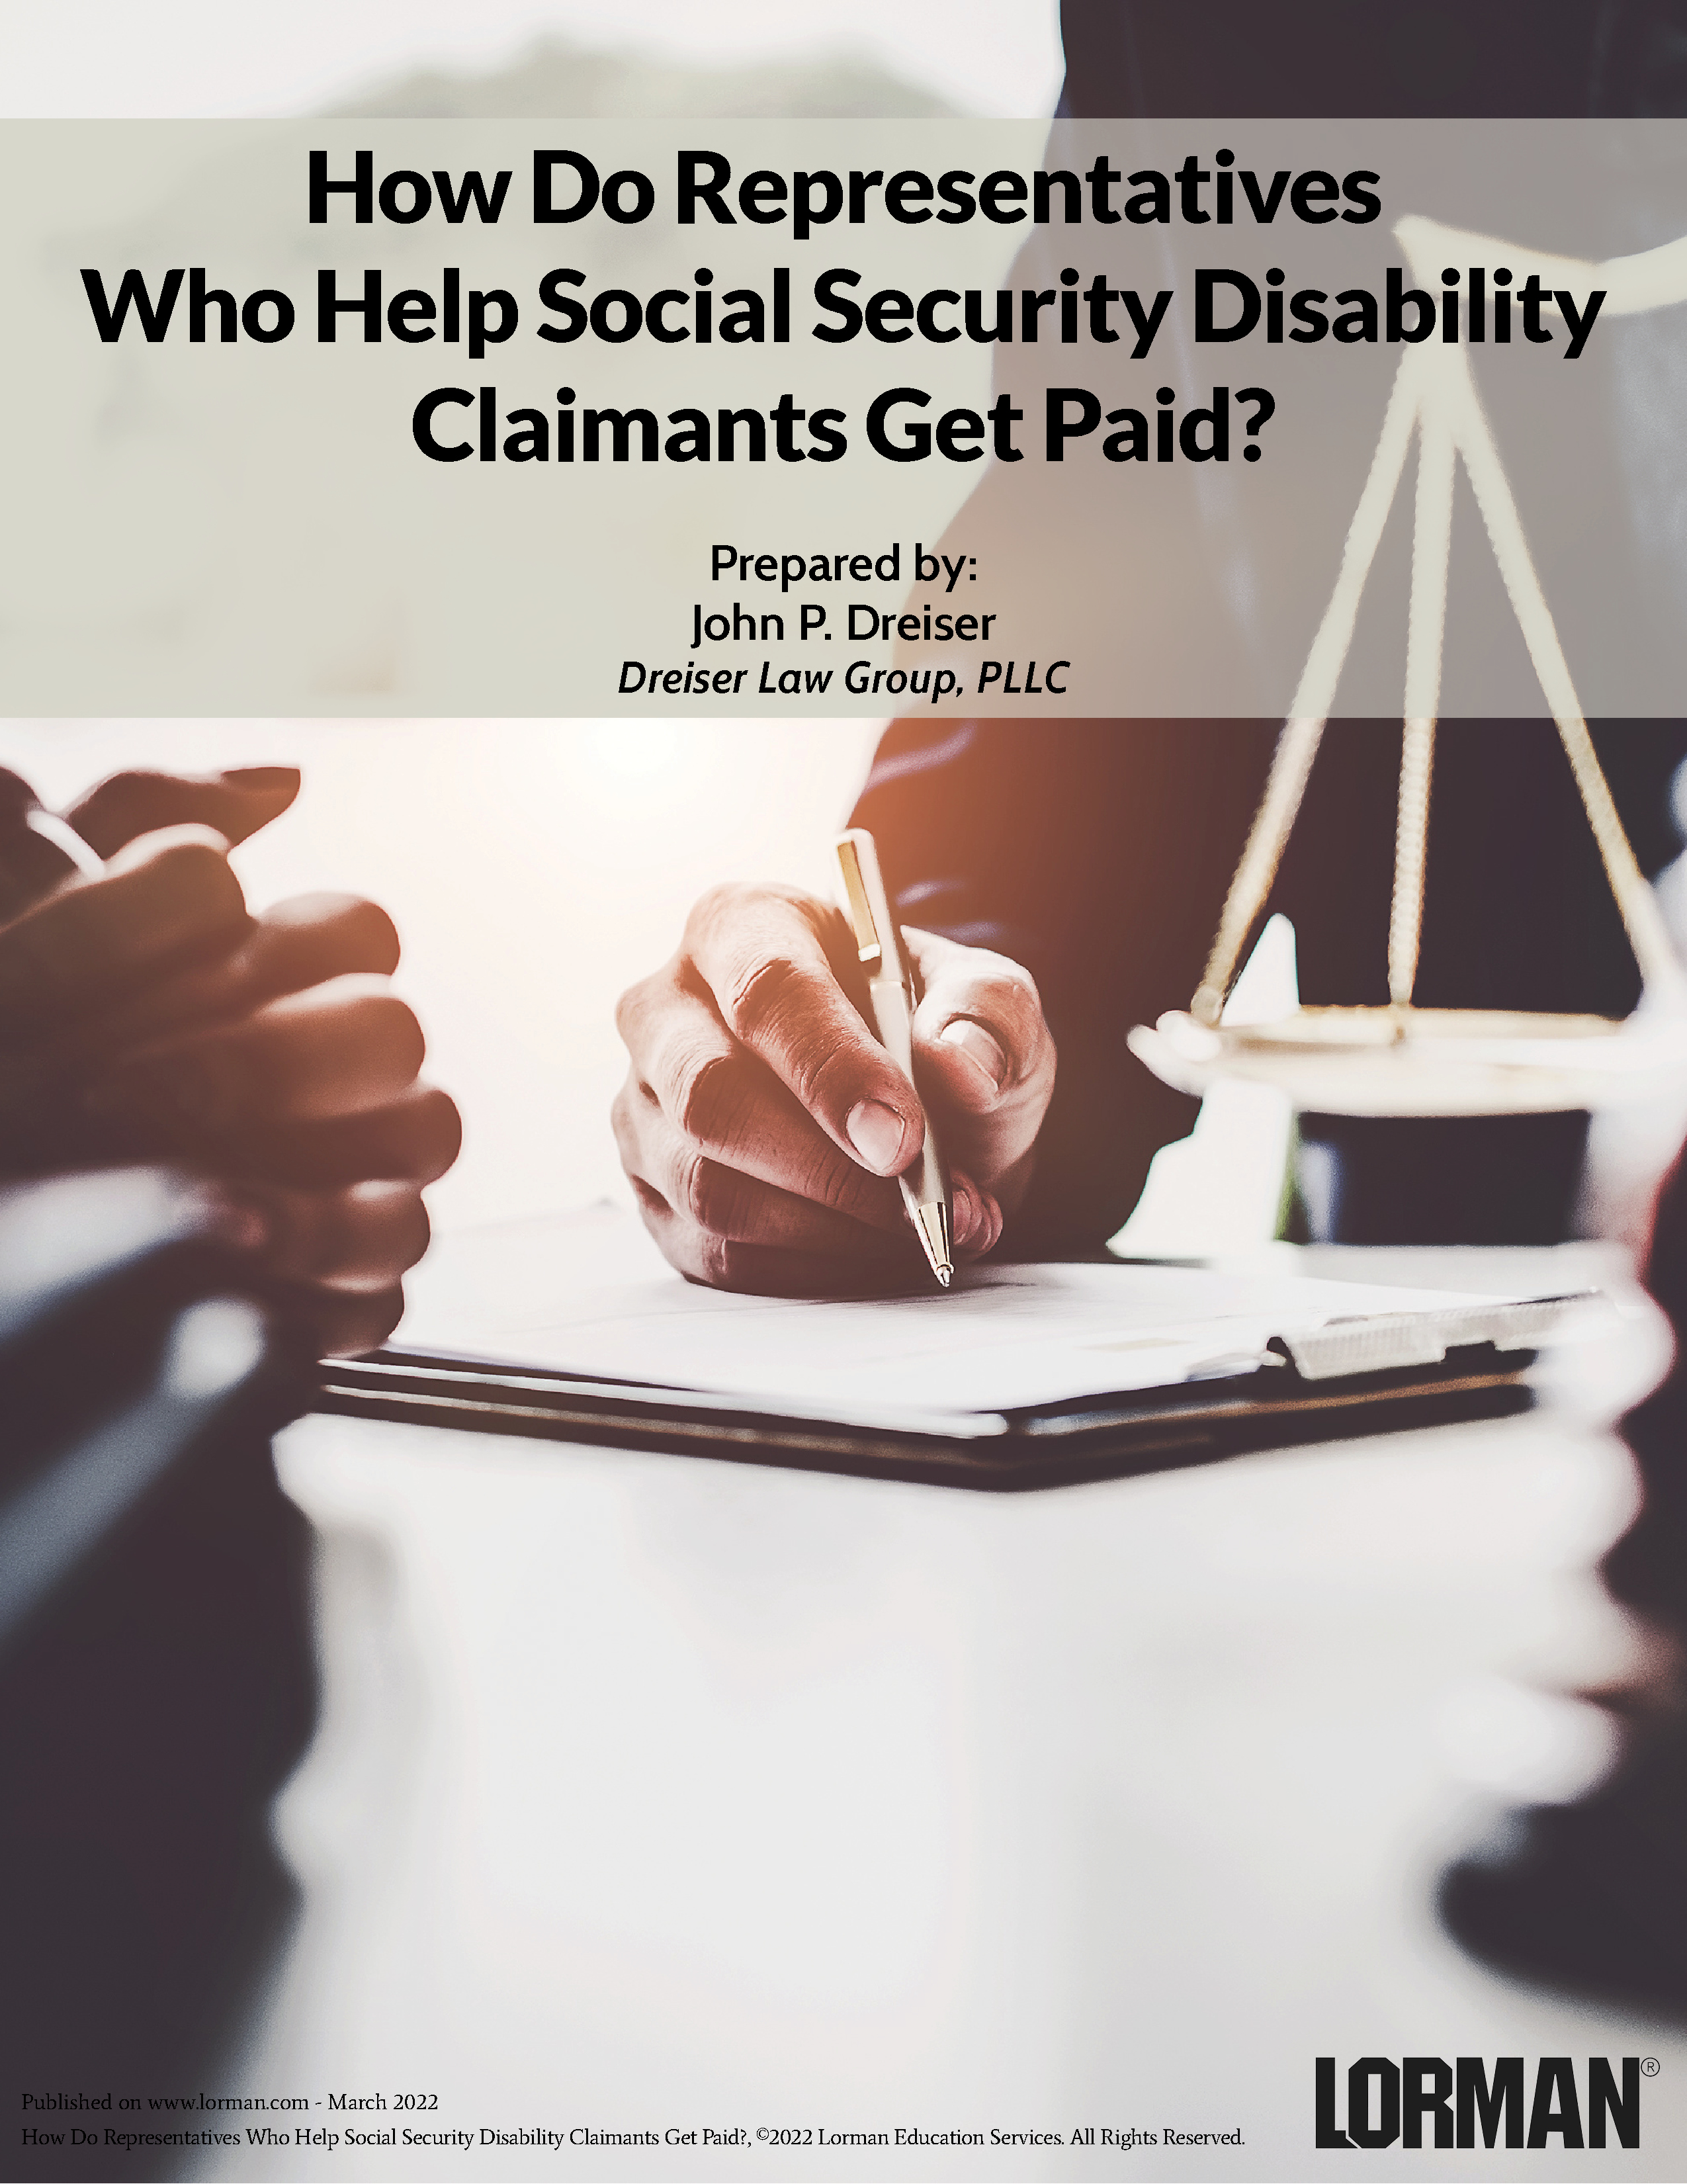 How Do Representatives Who Help Social Security Disability Claimants Get Paid?